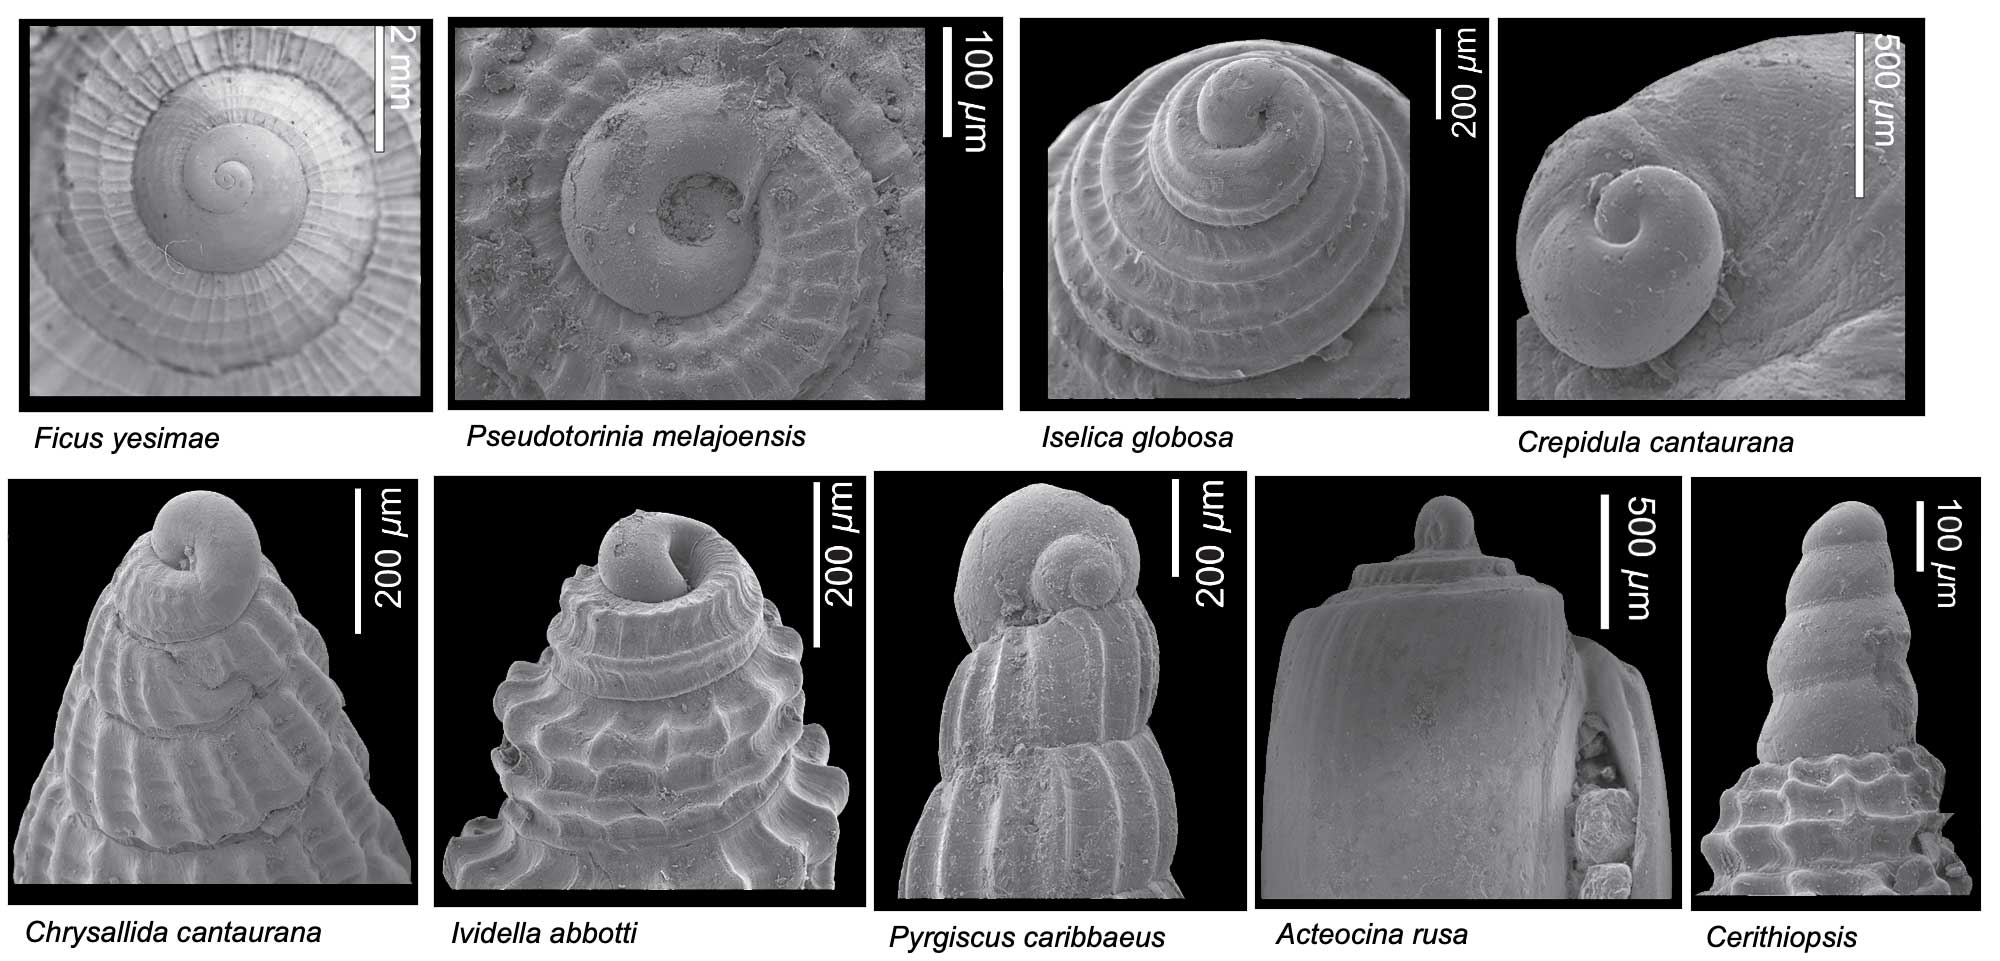 Magnified images of a diversity of fossil gastropod protoconchs.